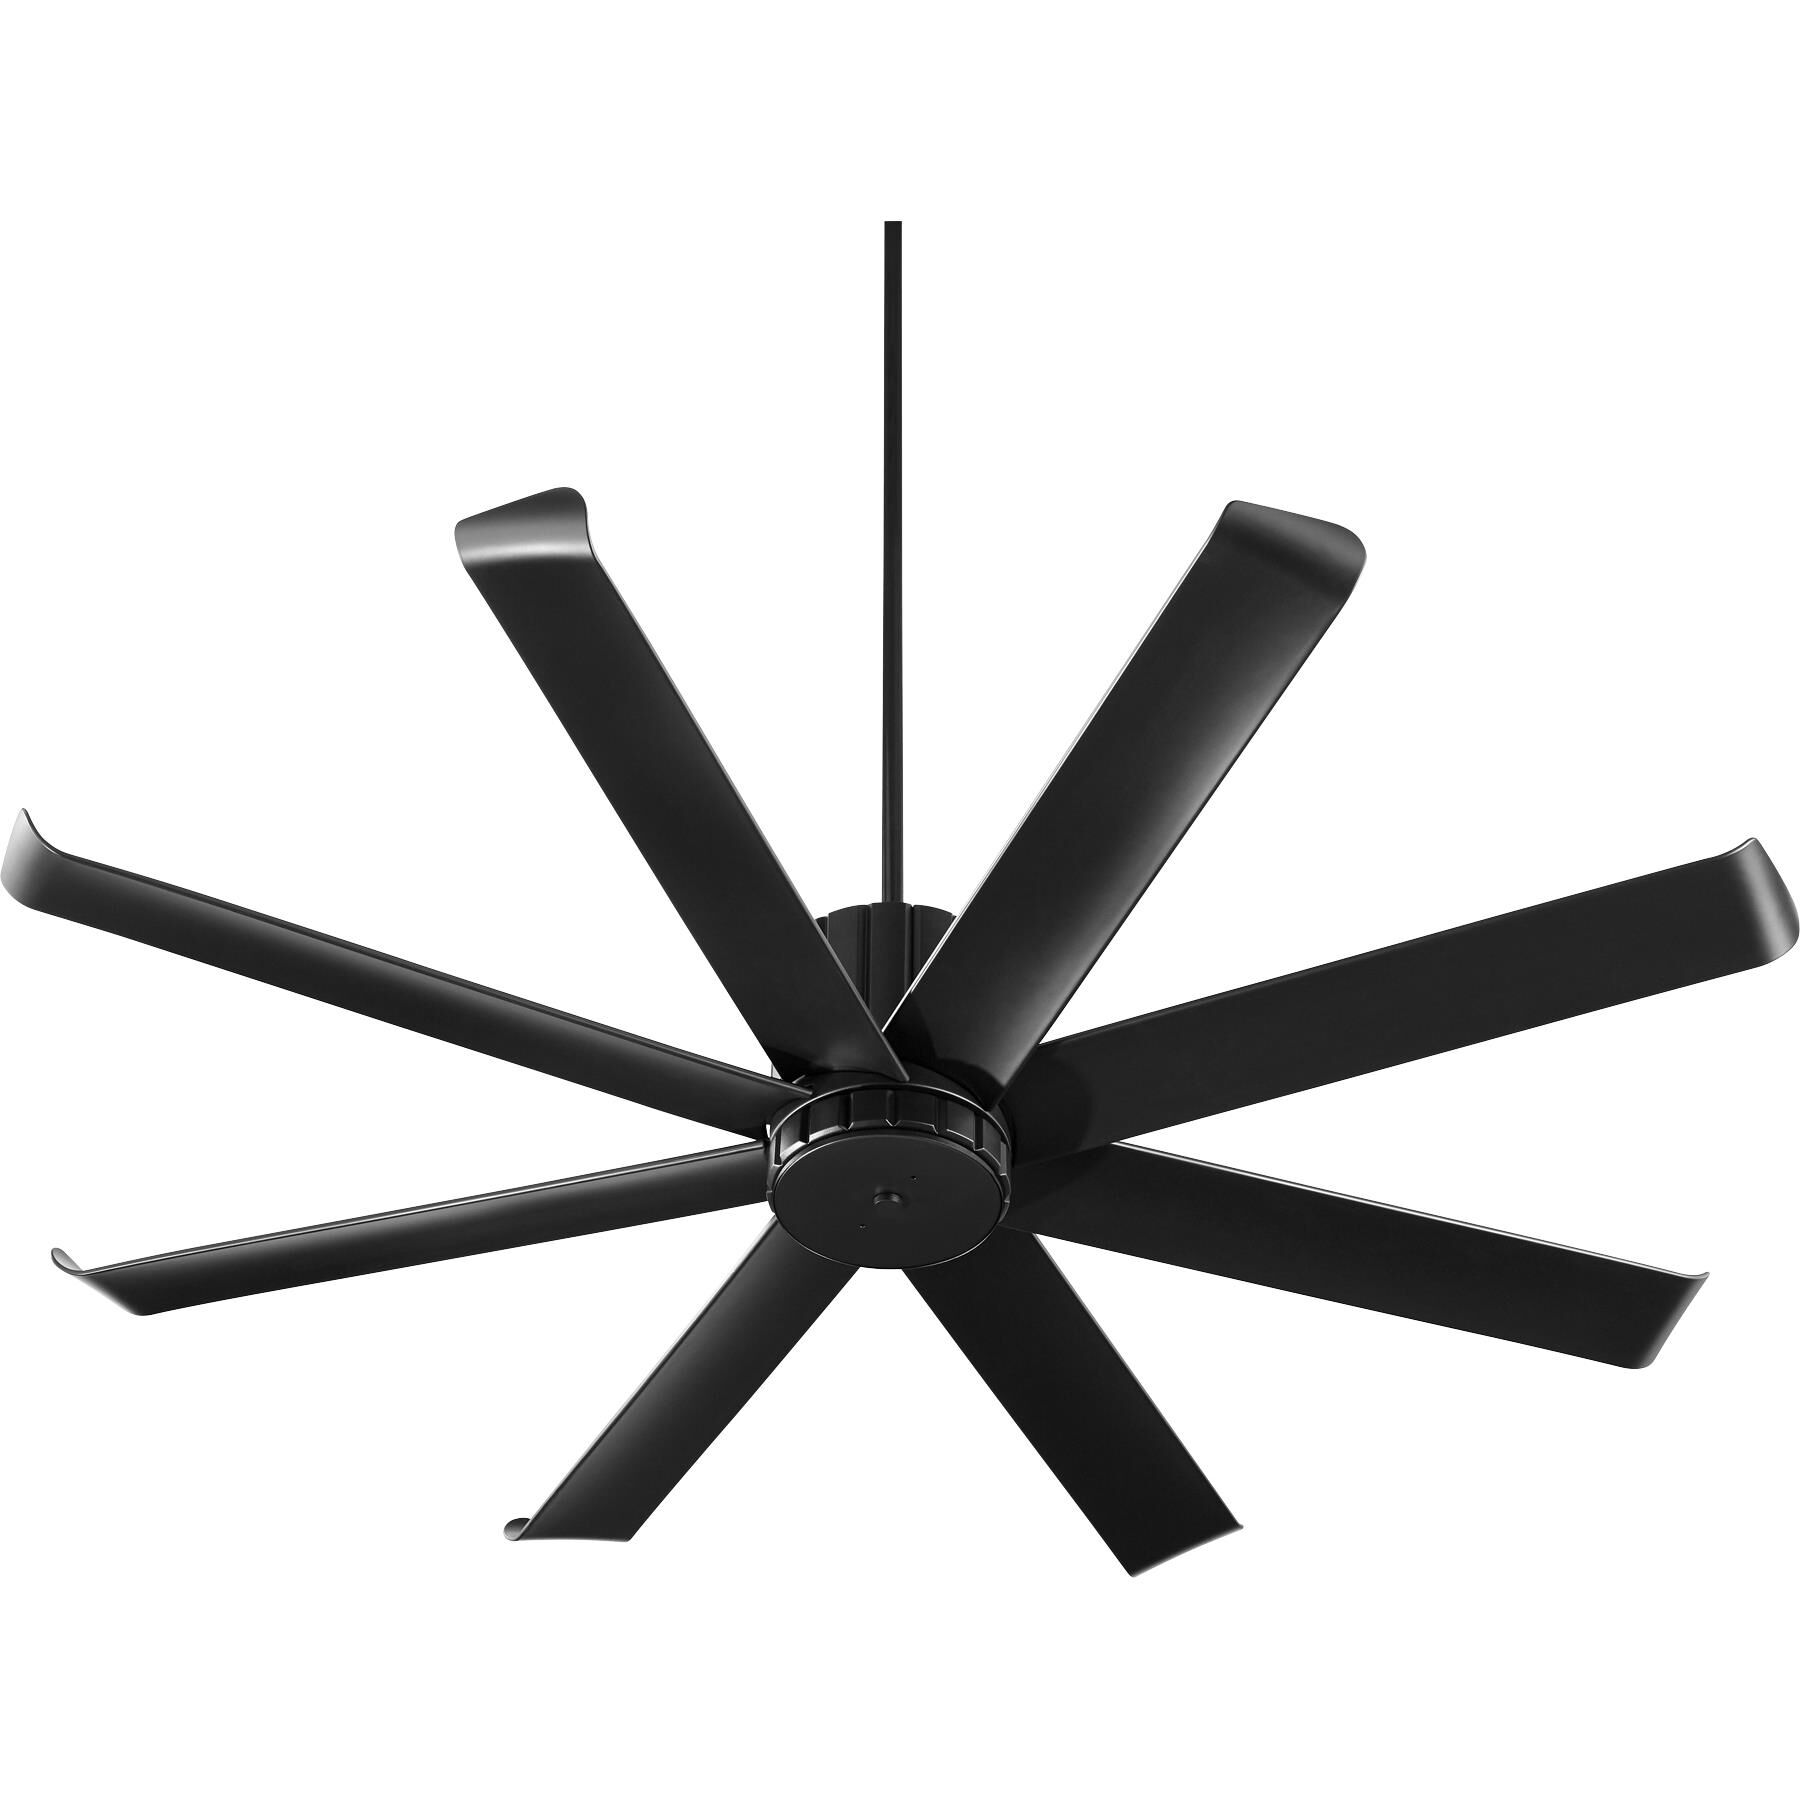 Photos - Fan Quorum International Proxima Patio Outdoor Rated 60 Inch Ceiling  Proxi